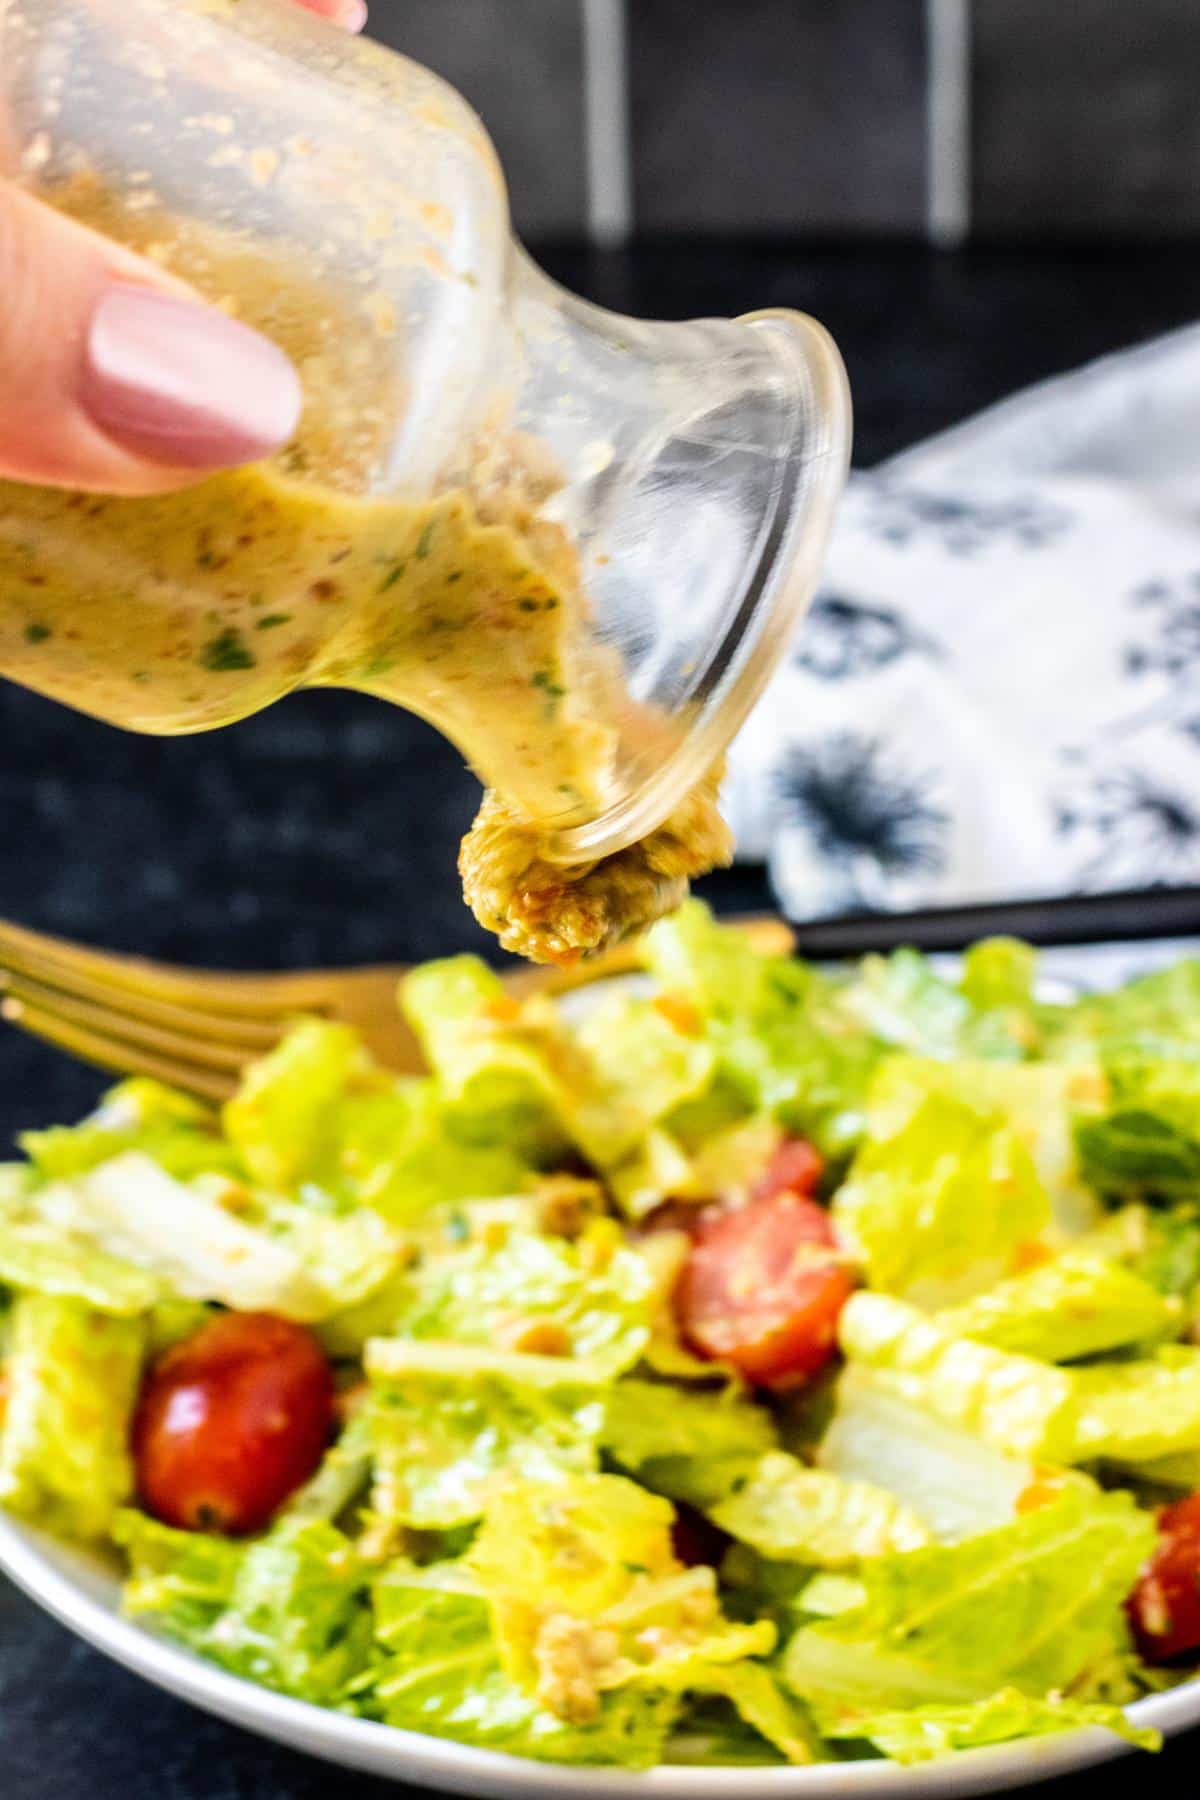 Hand pouring dressing from a bottle onto a salad with lettuce and tomatoes.